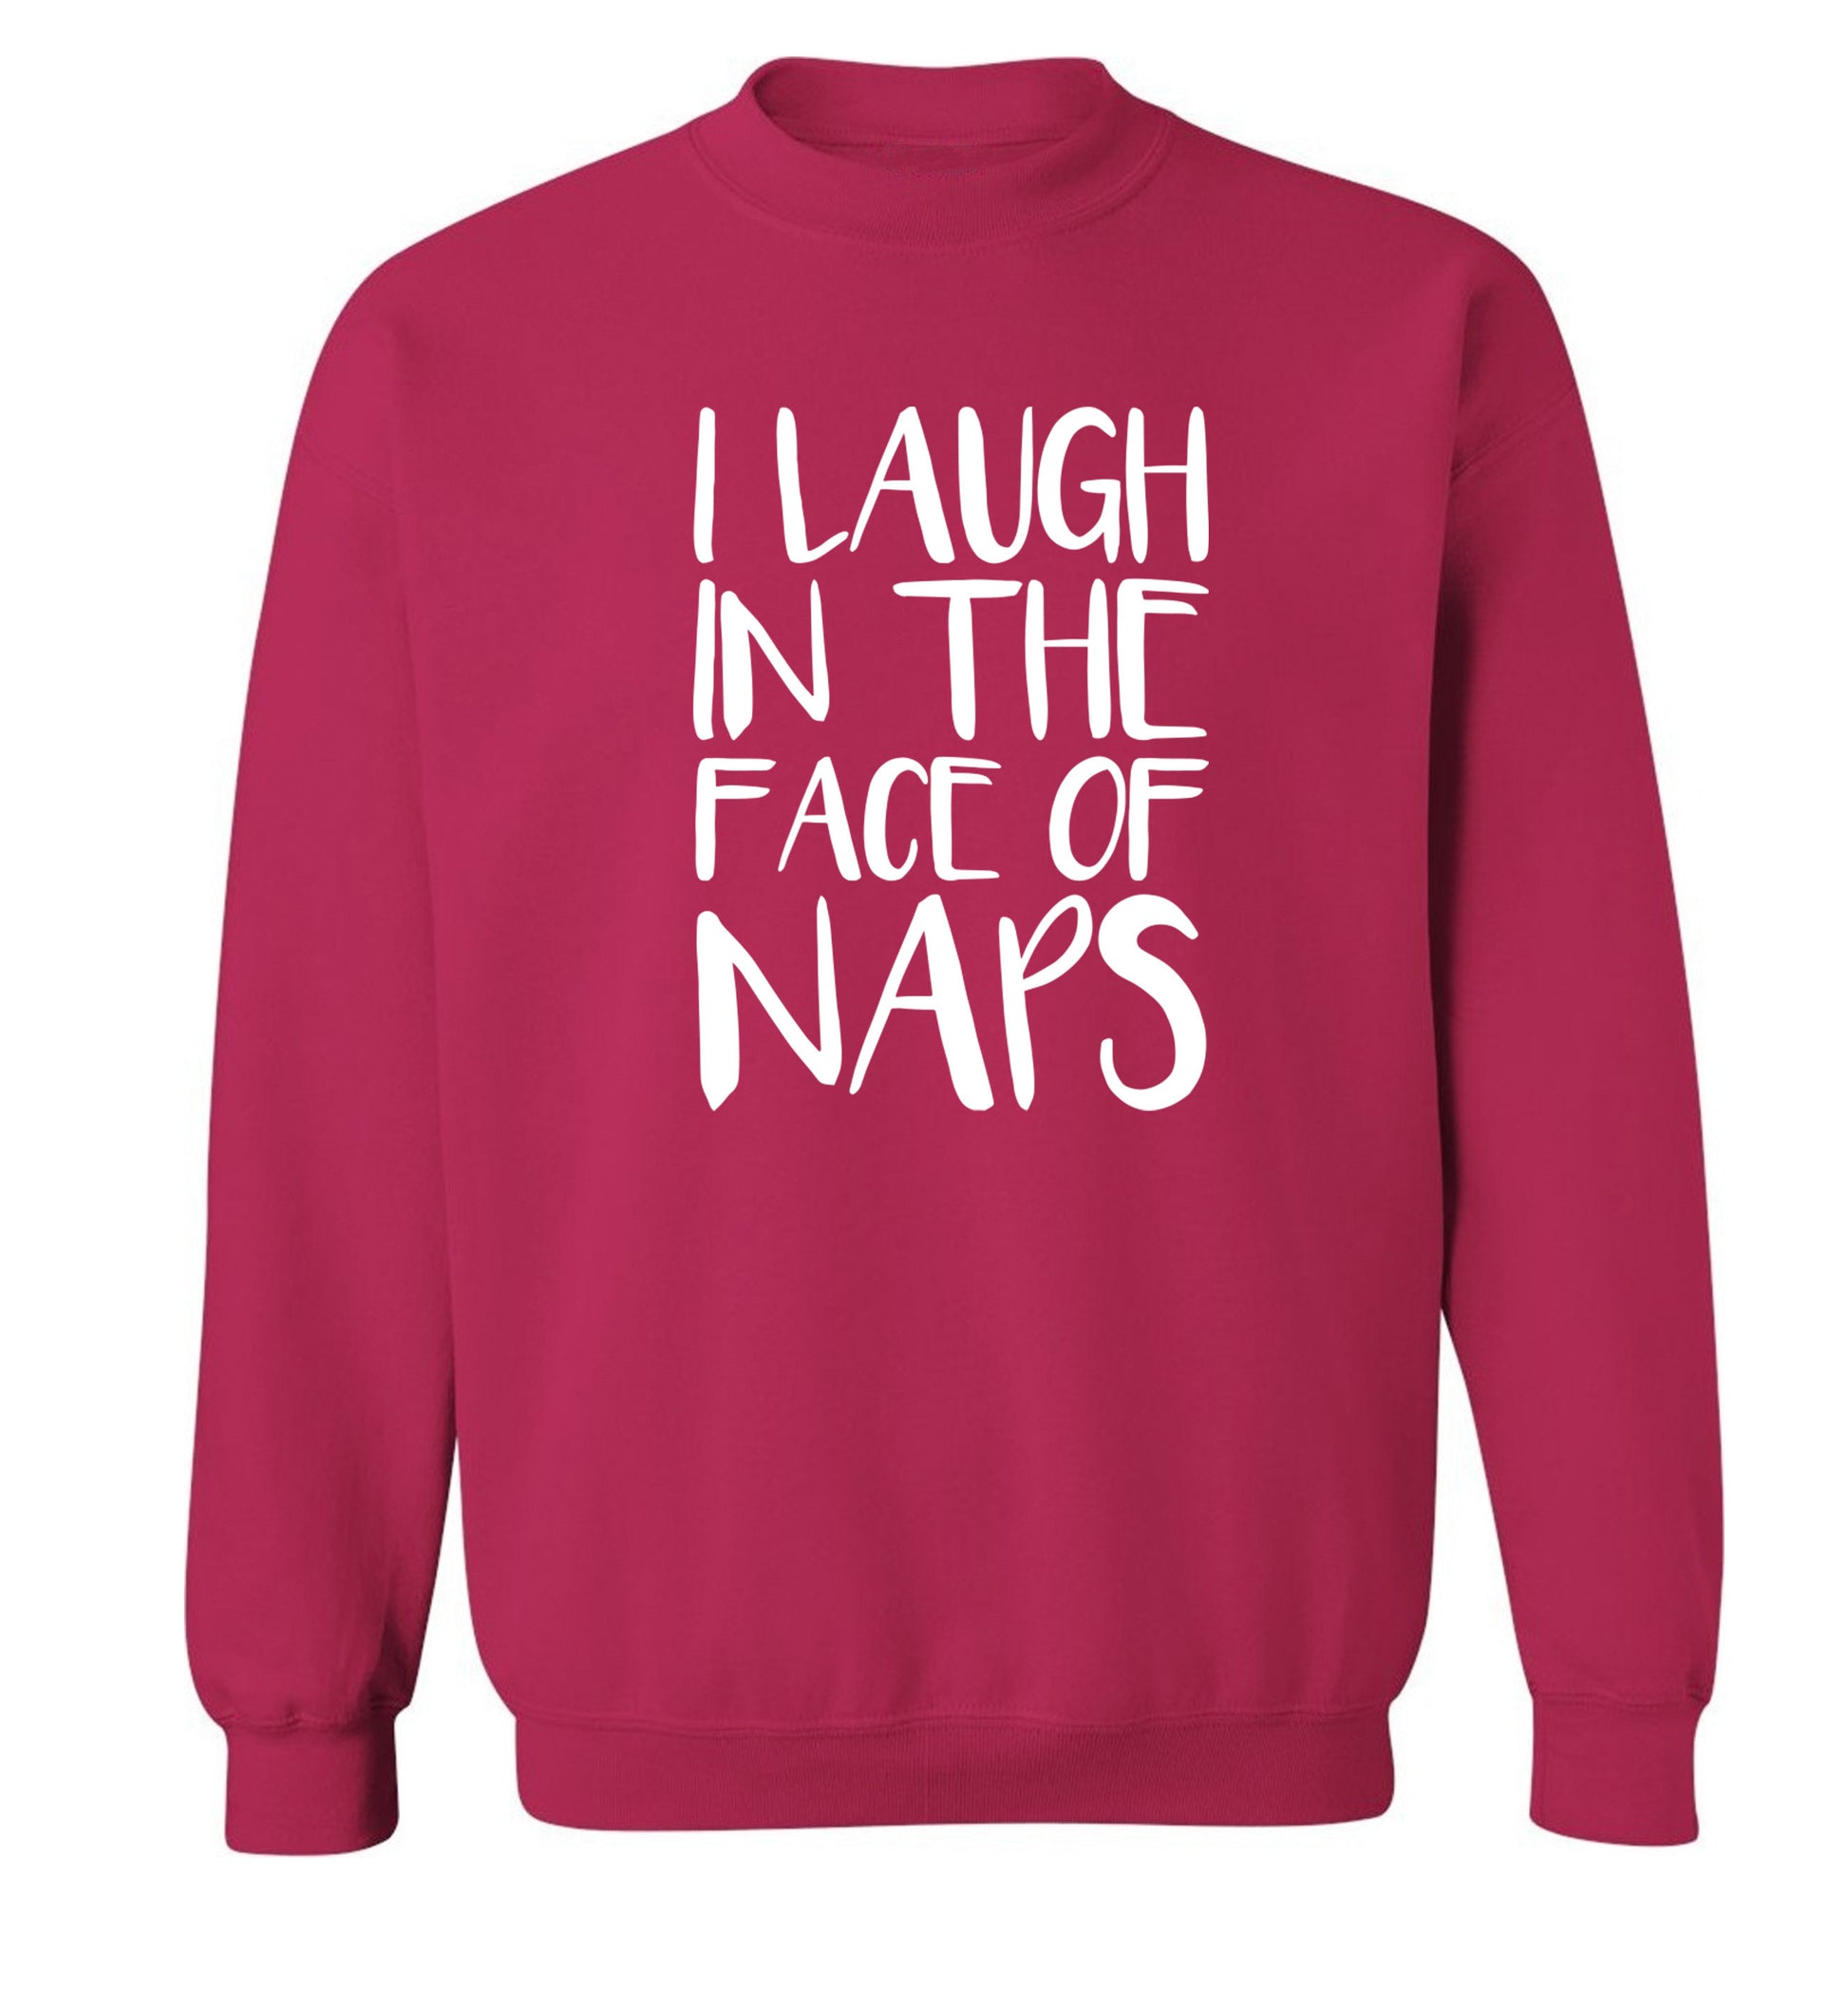 I laugh in the face of naps Adult's unisex pink Sweater 2XL